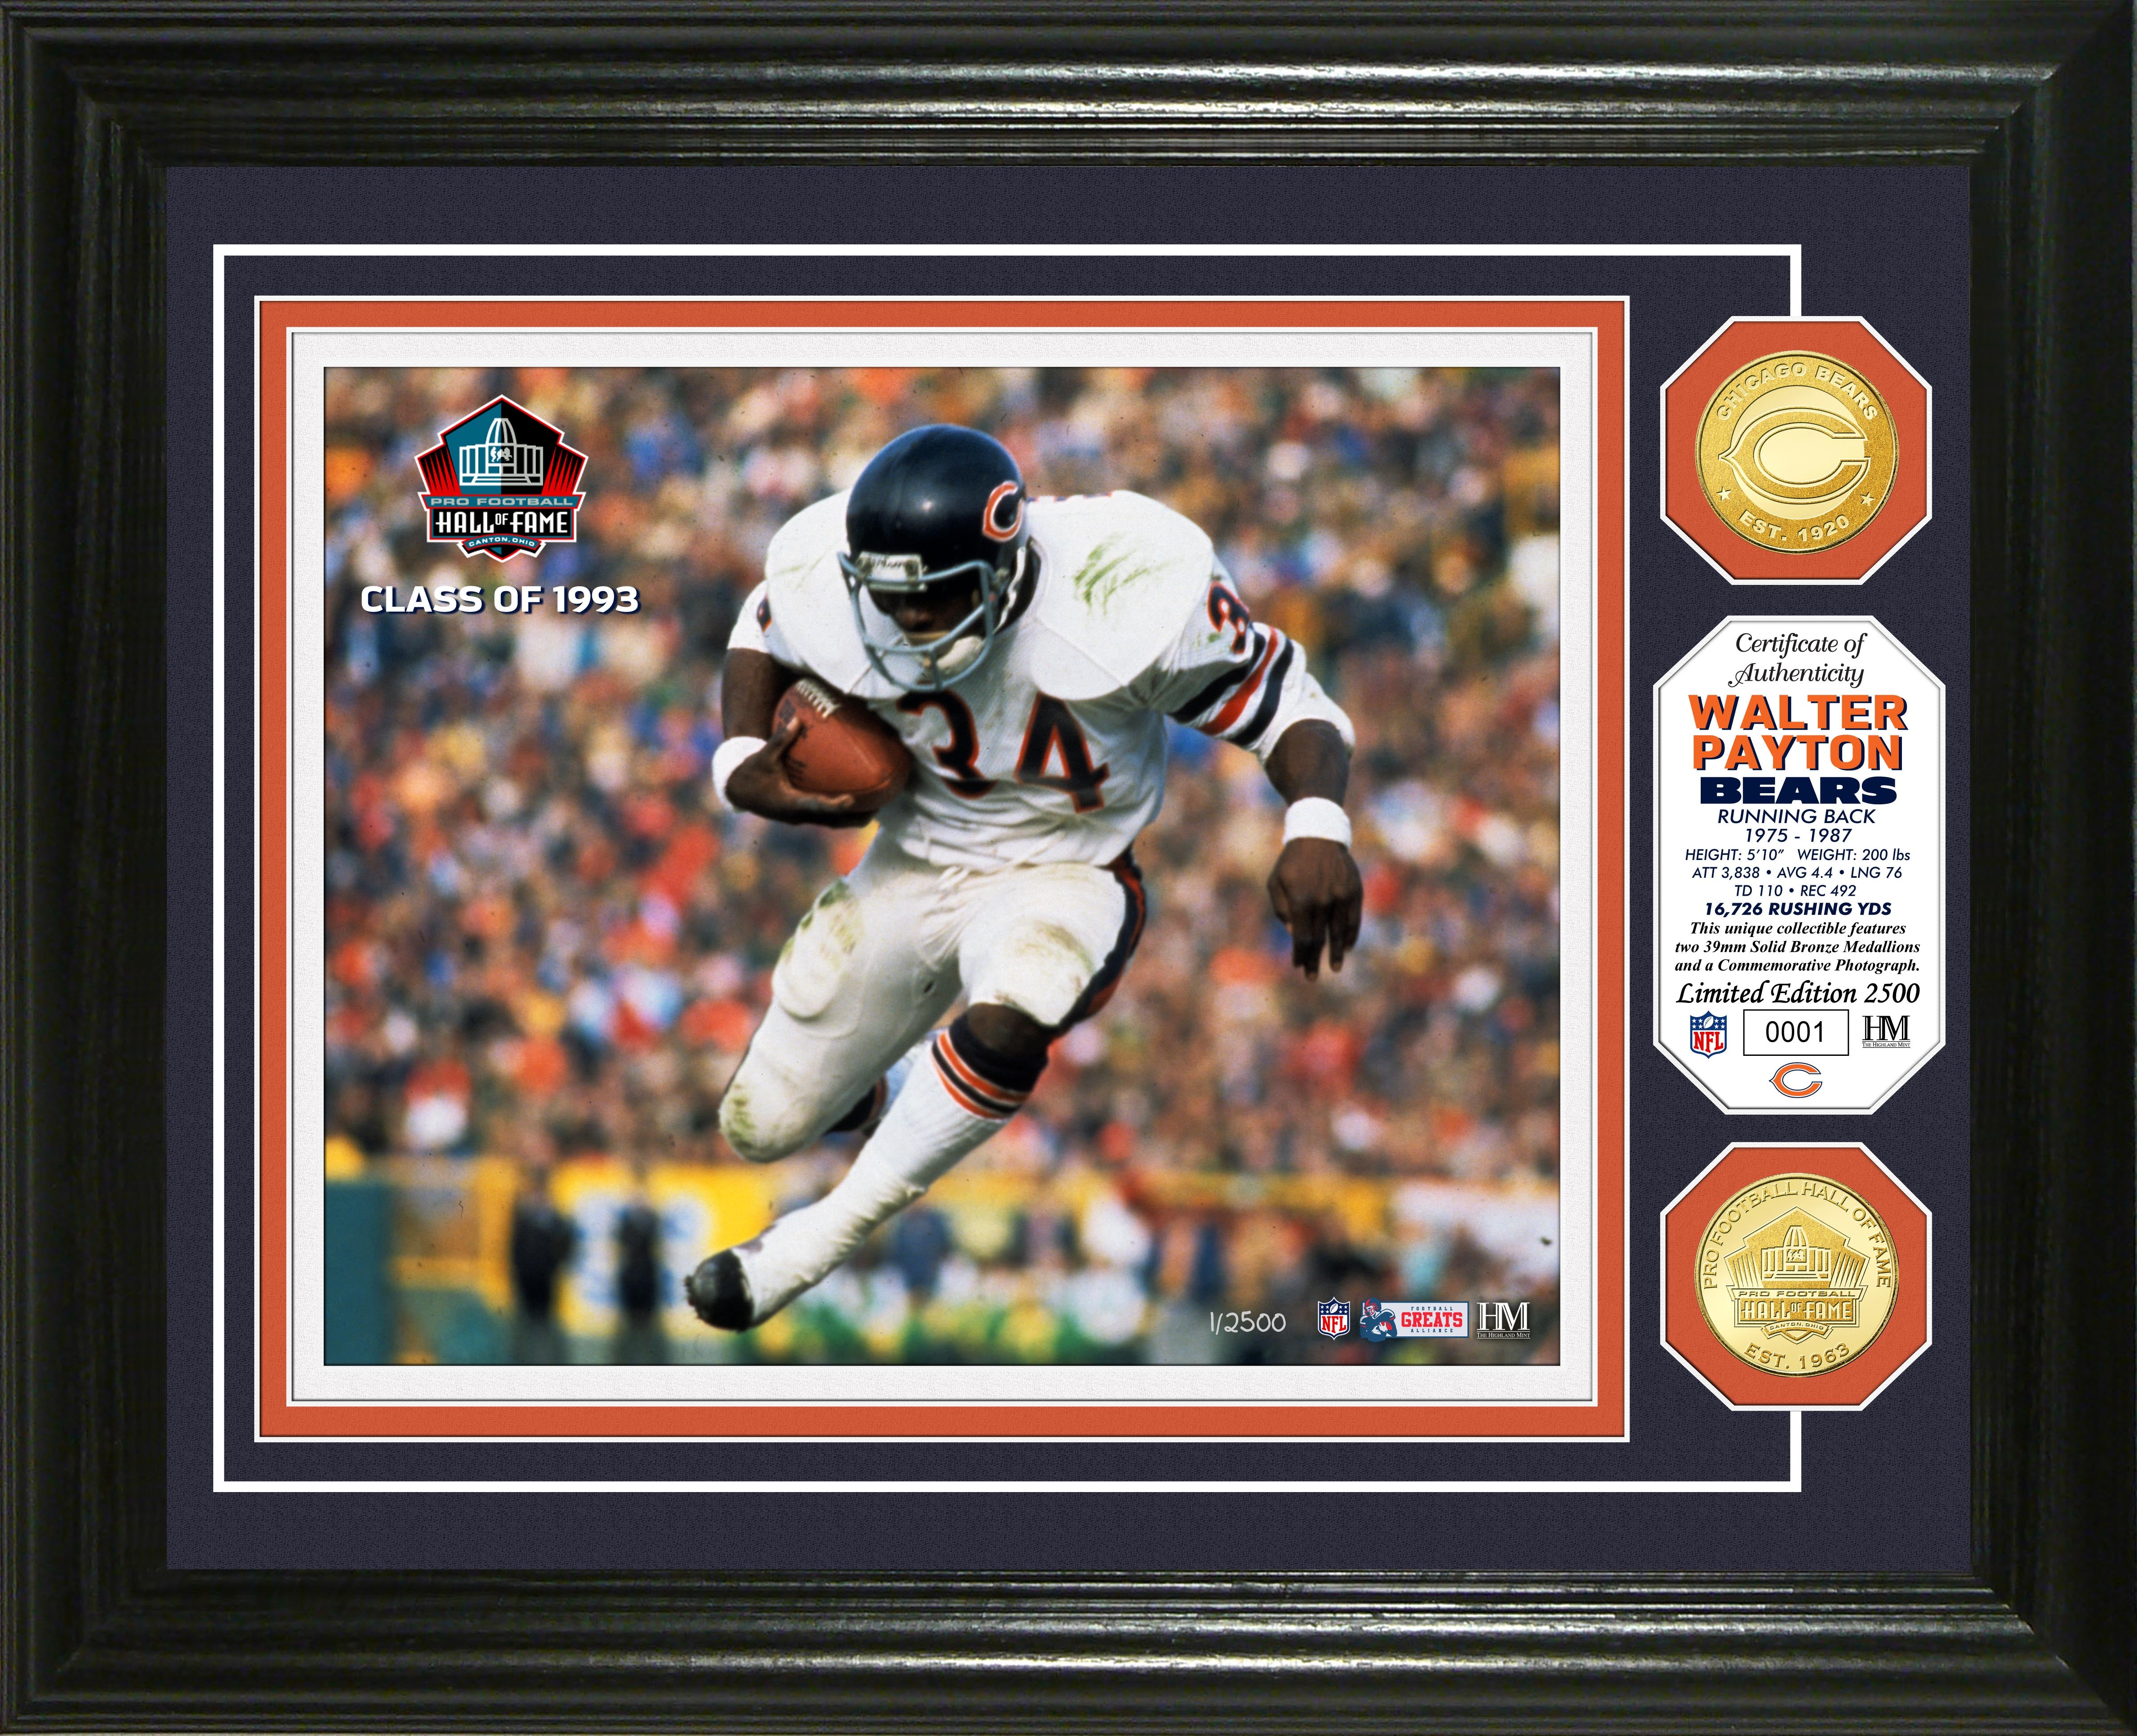 Walter Payton Pro Football Hall of Fame Bronze Coin Photo Mint